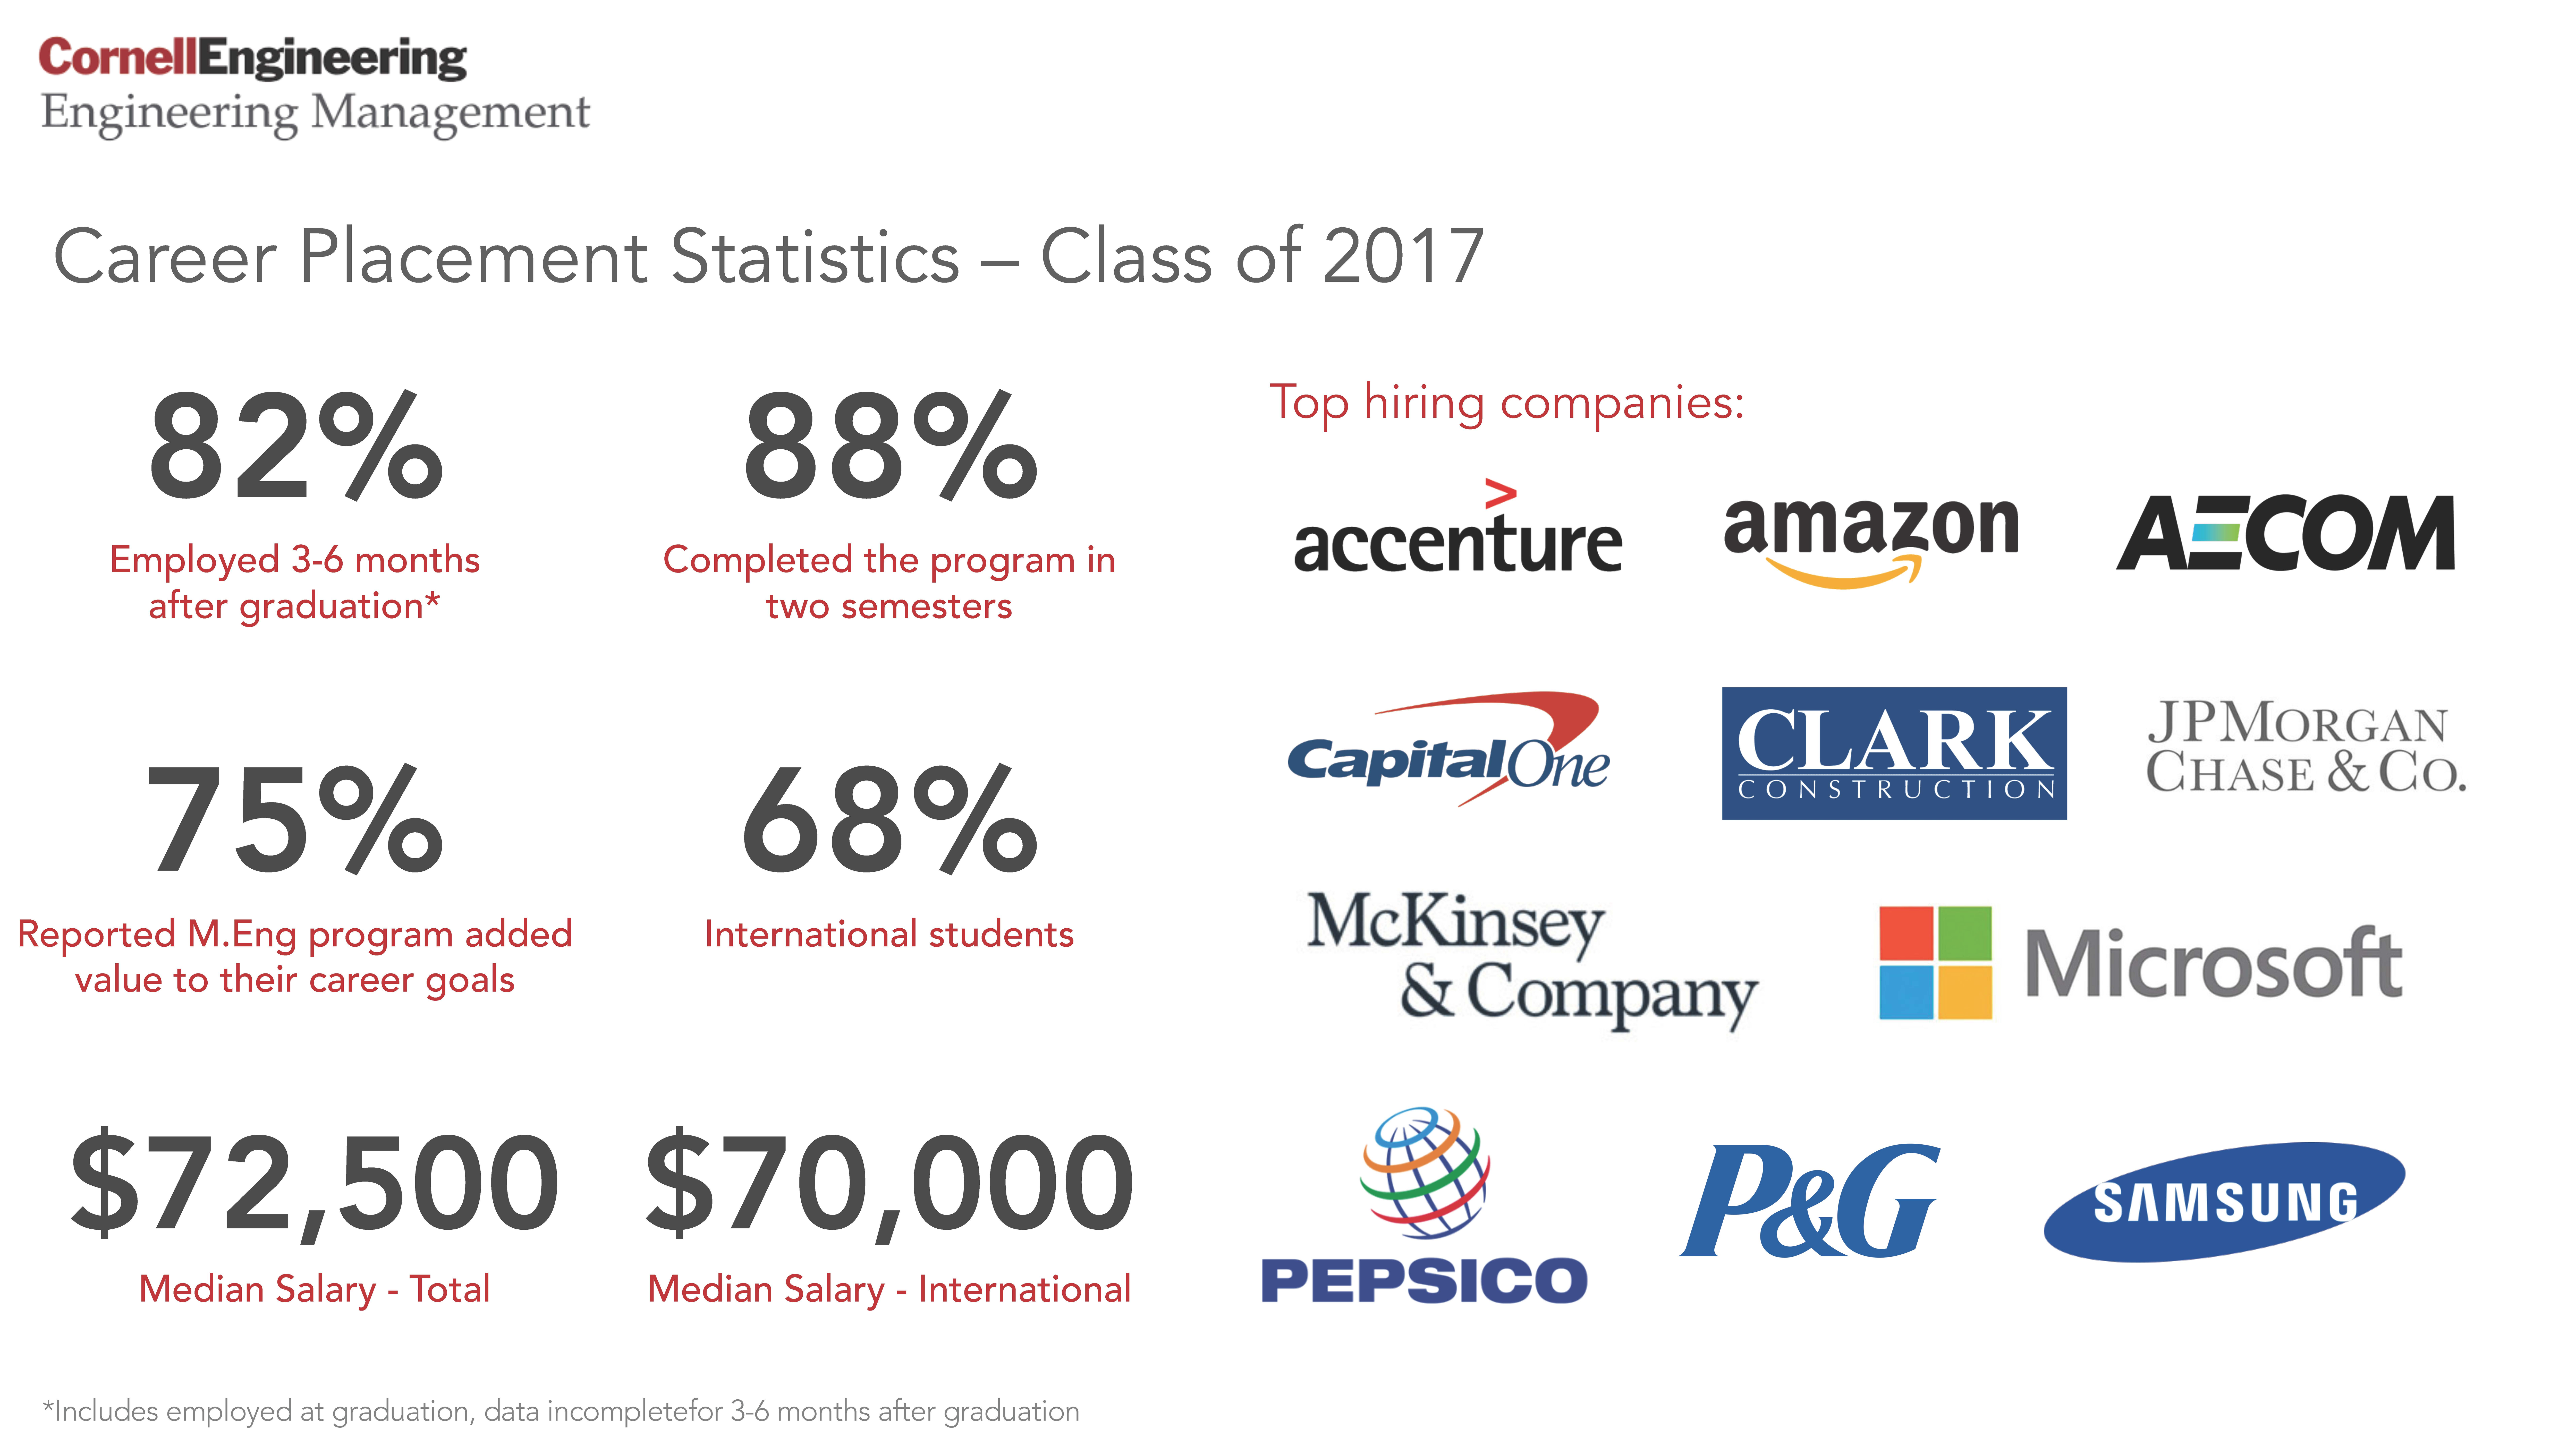 Career Placement Statistics – Class of 2017  82% Employed 3-6 months after graduation* 88% Completed the program in two semesters 75% Reported M.Eng. program added value to their career goals 68% International students $72,500 Median Salary – Total $70,000 Median Salary – International  *Includes employed at graduation, data incomplete for 3-6 months after graduation  Top hiring companies Accenture Amazon Aecom CapitalOne Clark Construction JPMorgan Chase&Co. McKinsey & Company Microsoft Pepsico P&G Samsung